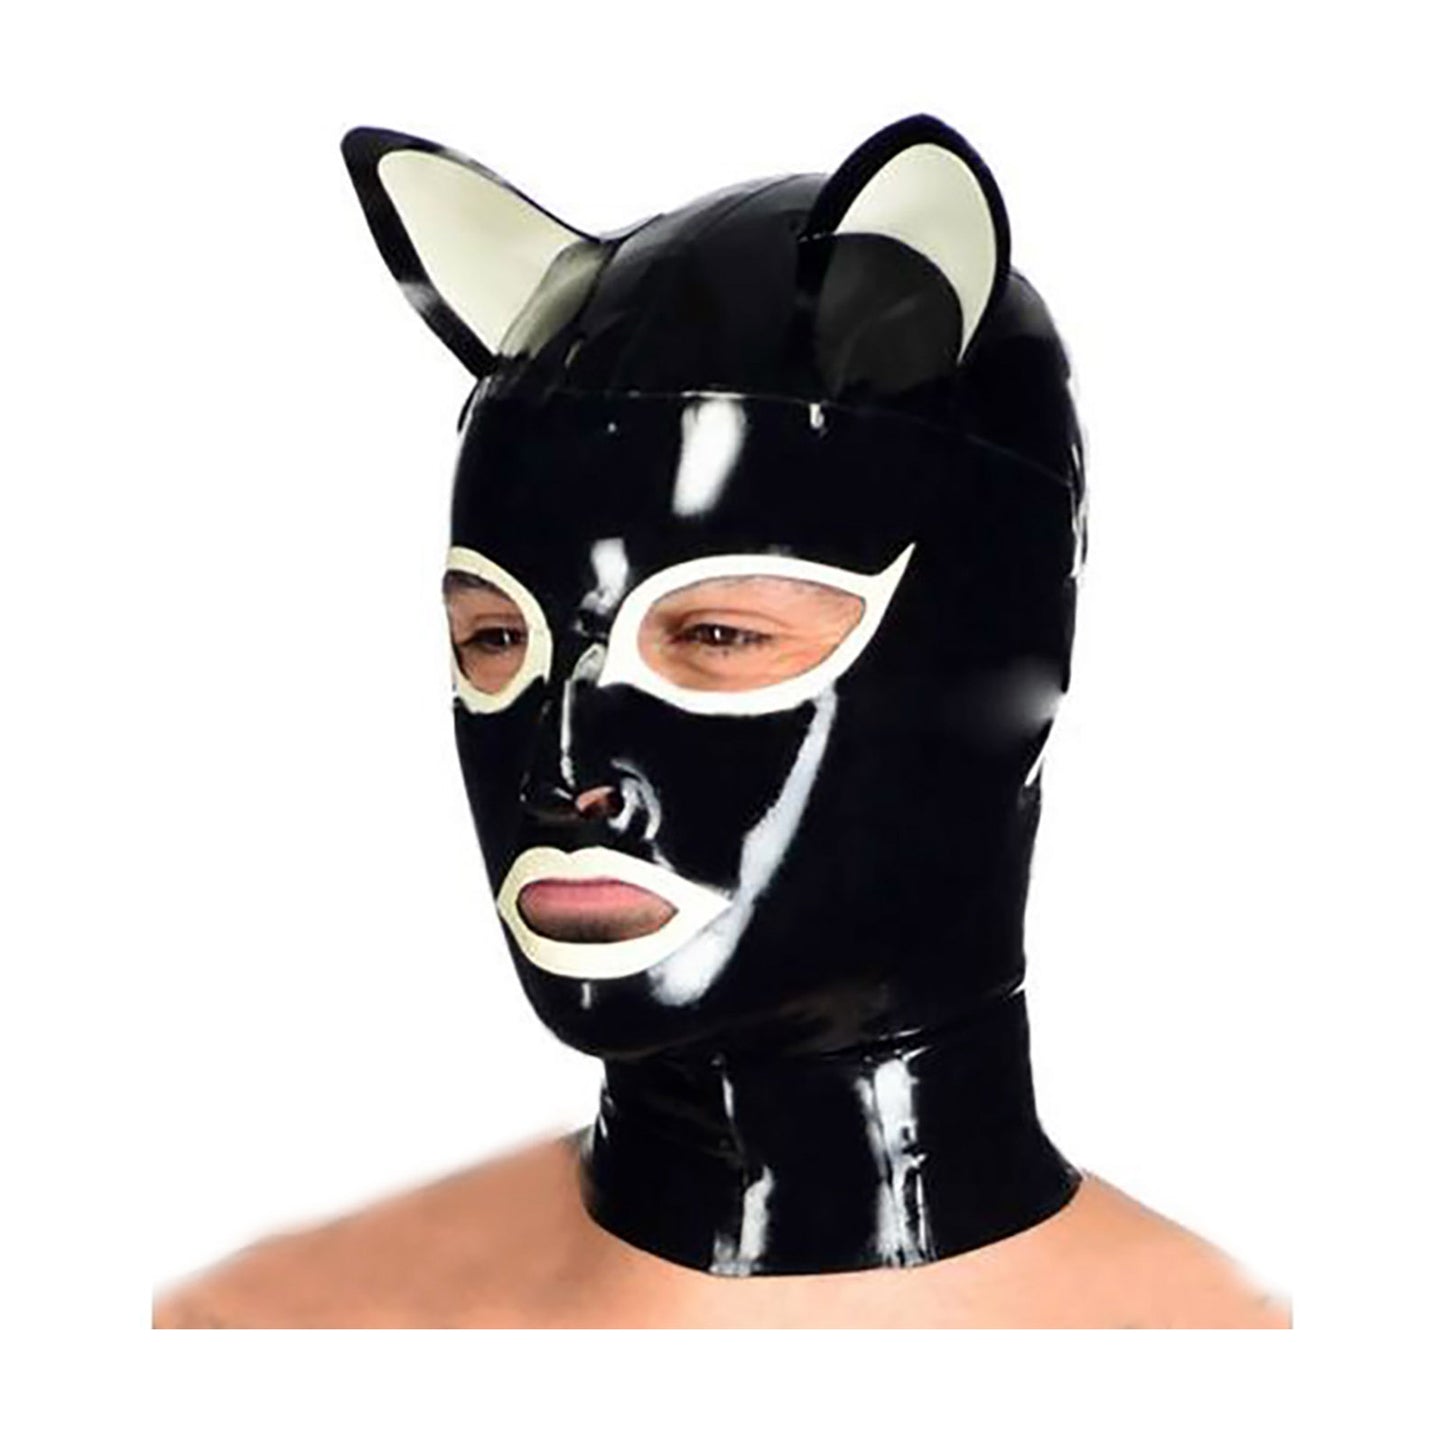 MONNIK Latex Mask Fashion Fetish Hood with White Cat Ears and Rear Zipper for Party Cosplay Halloween Catsuit